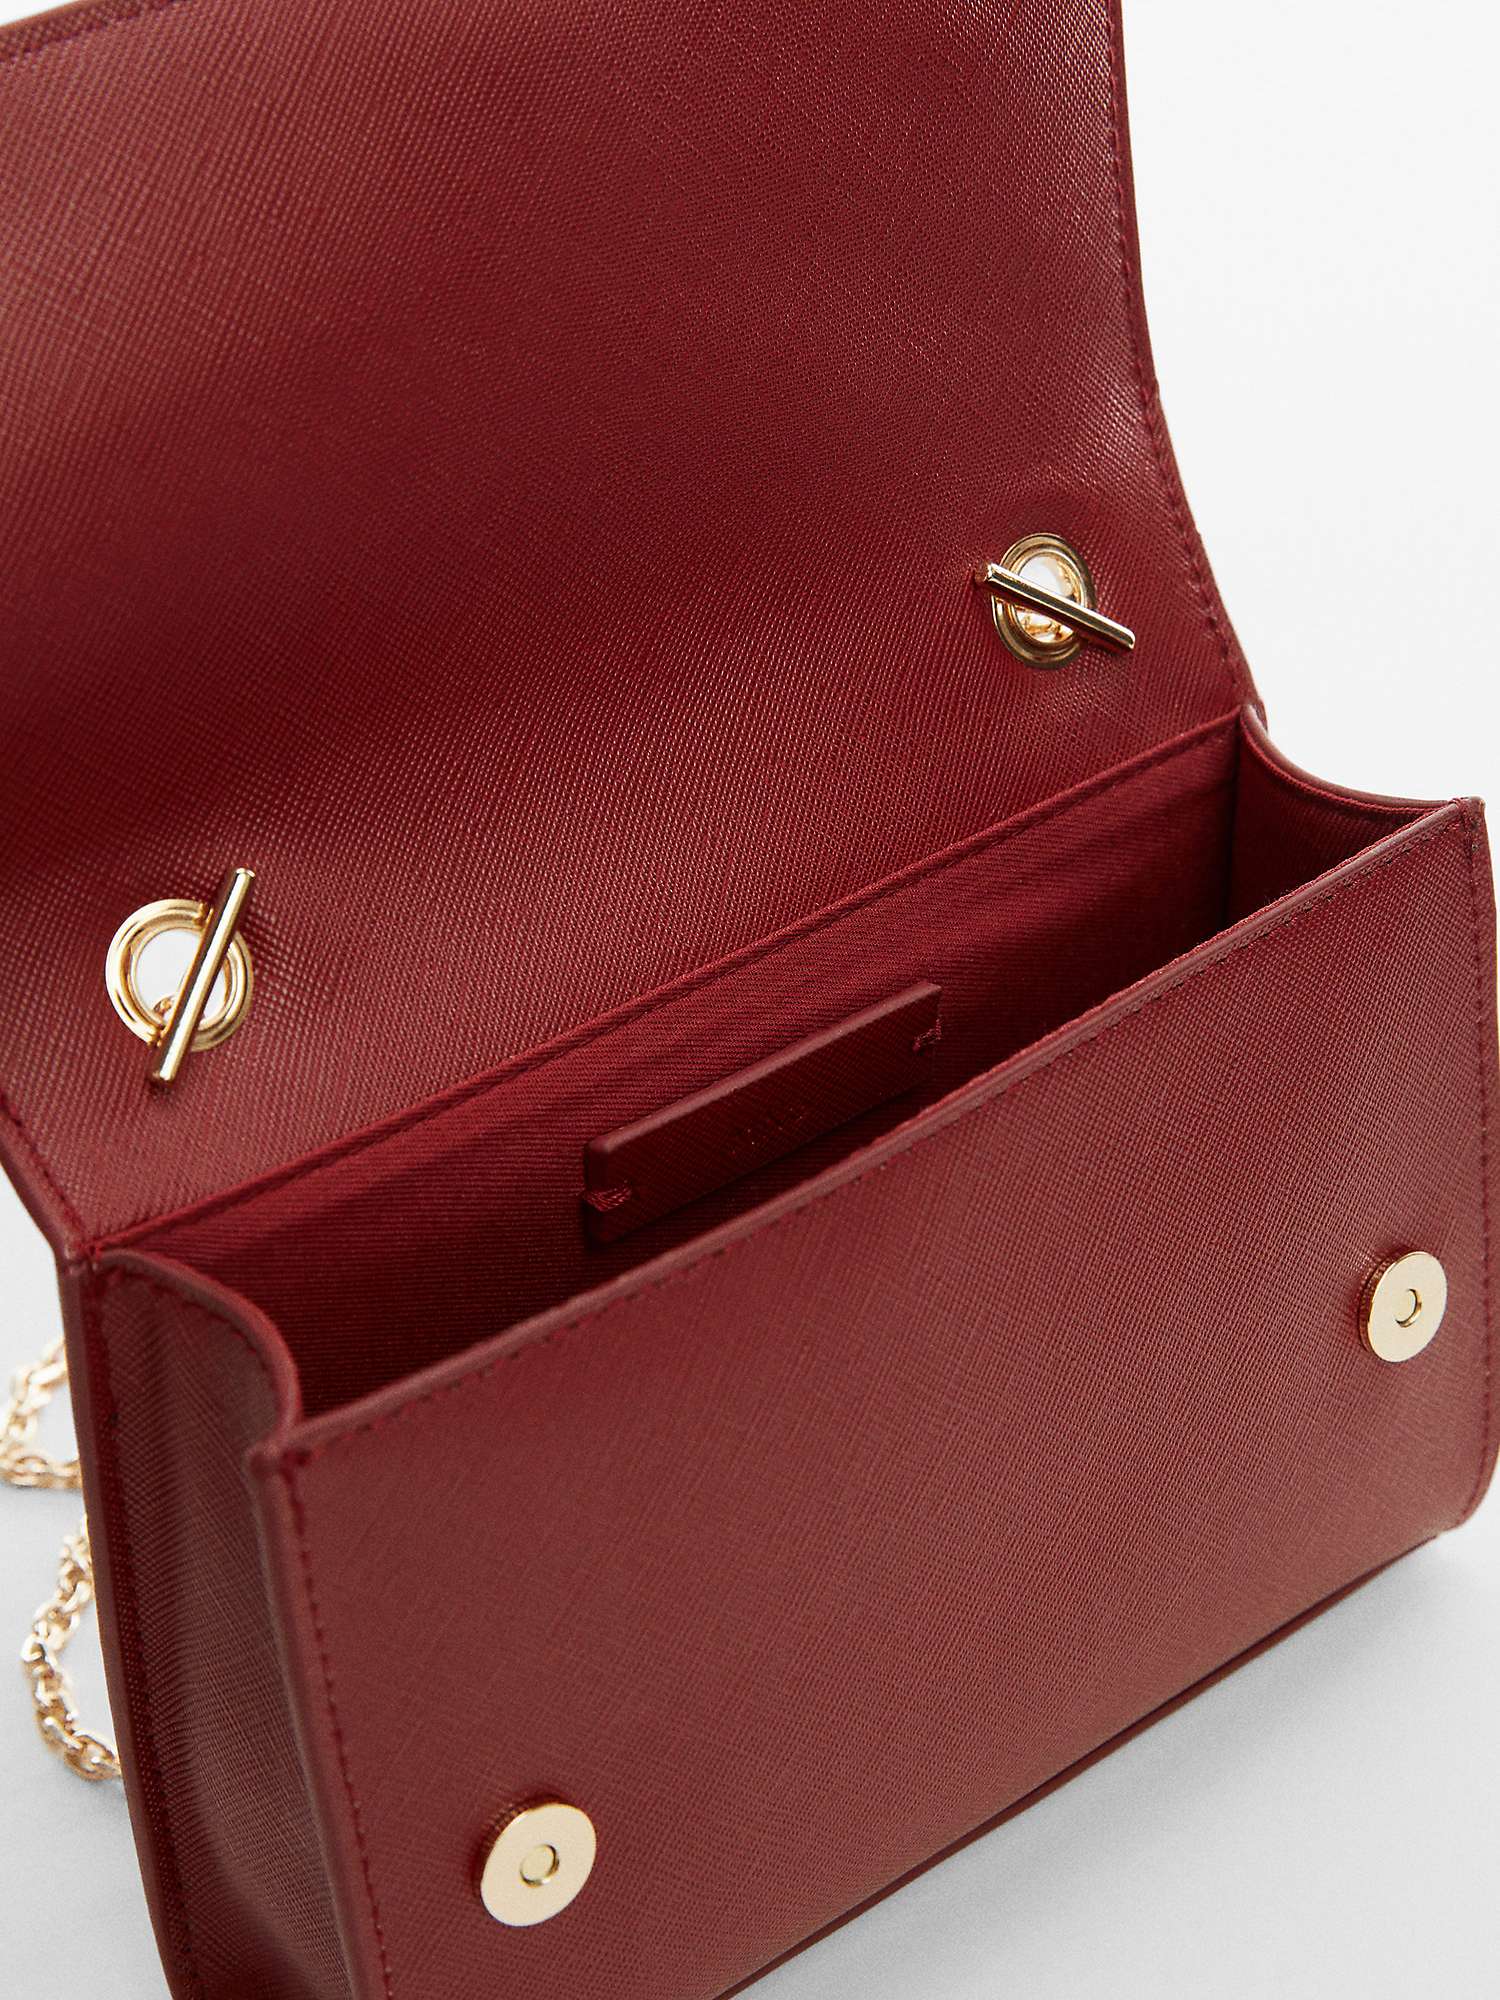 Buy Mango Coro Chain Strap Clutch Bag, Red Online at johnlewis.com